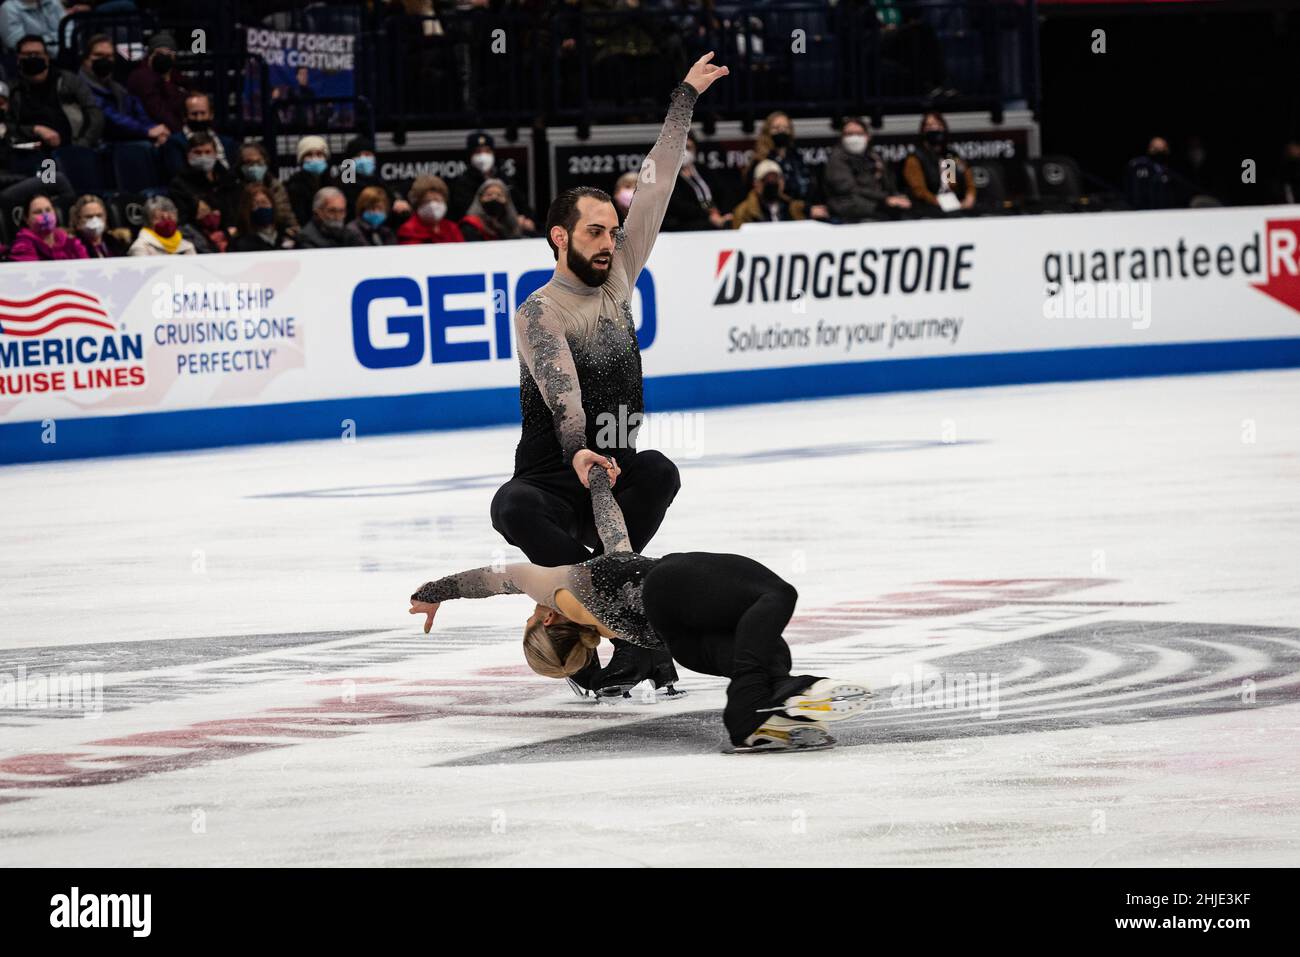 Ashley Cain-Gribble and Timothy LeDuc compete in the free skate that helped them win the gold medal at the U.S. National Figure Skating Championships. Stock Photo